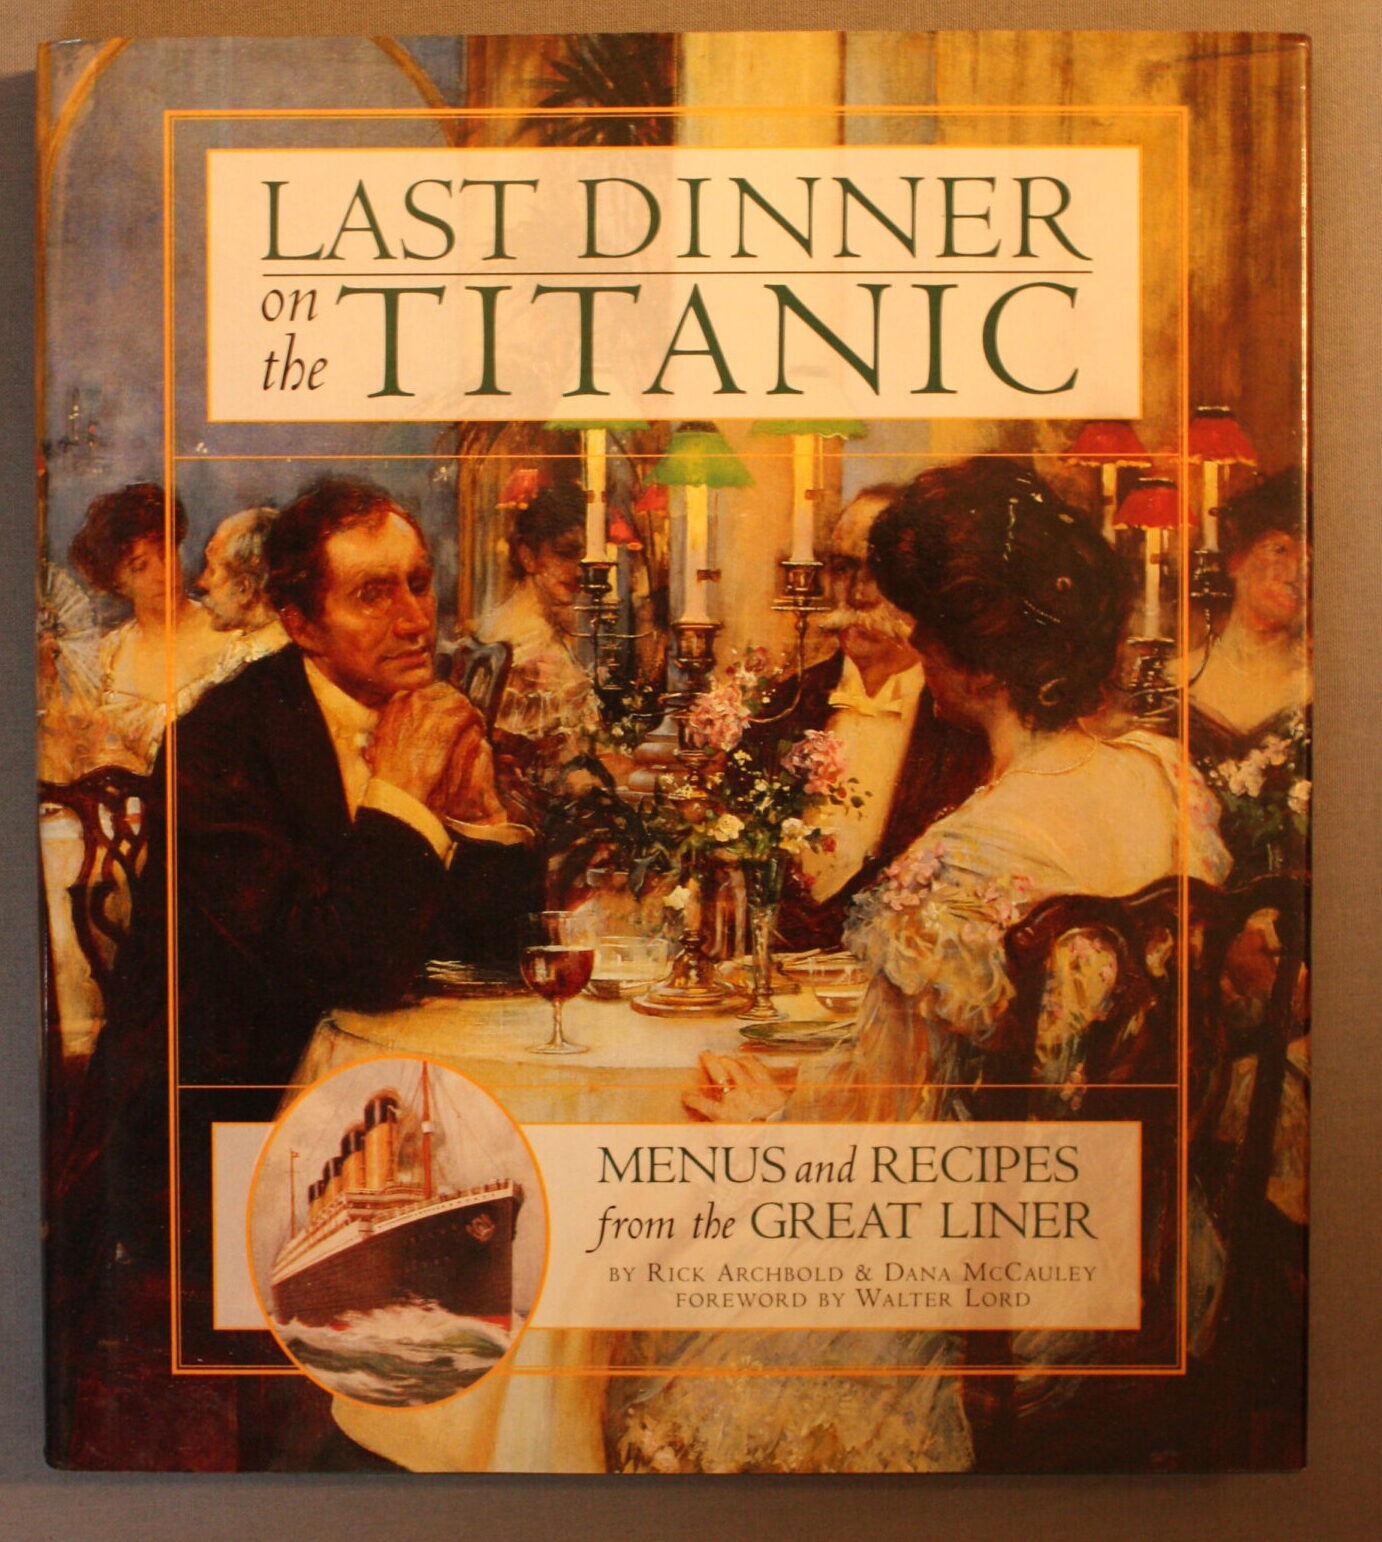 Liner　AS　Archbold,　the　and　from　recipes　–　Menues　TITANIC　Rick:　DINNER　THE　ON　LAST　Antikvarius　Great　–